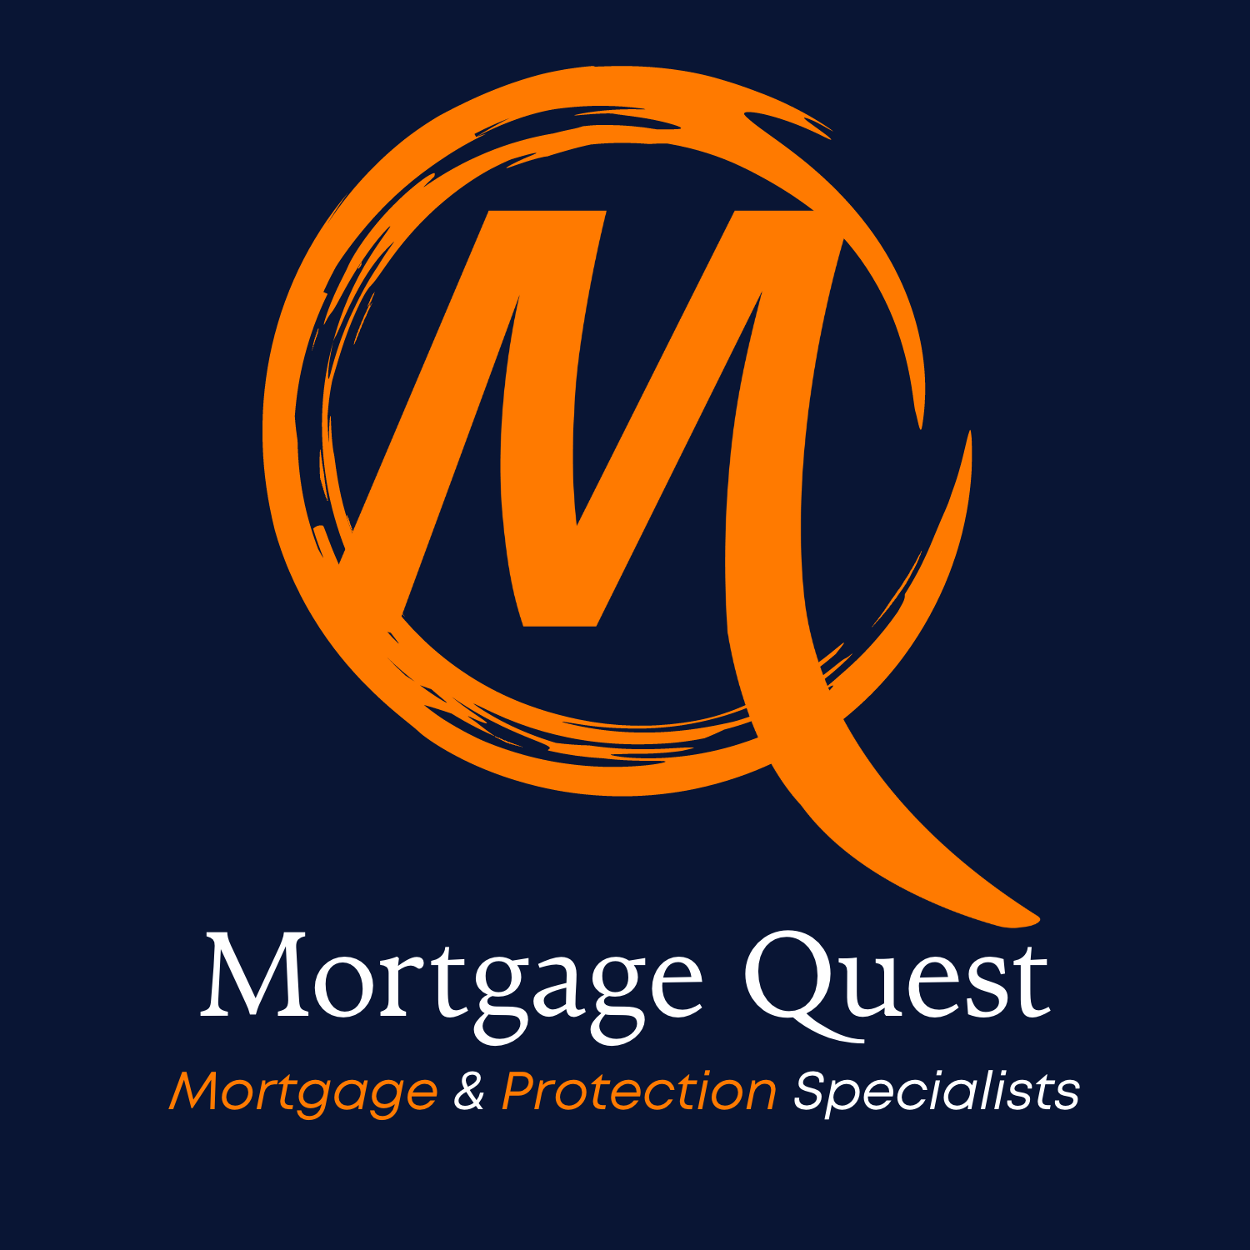 Mortgage adviser in royston and uk